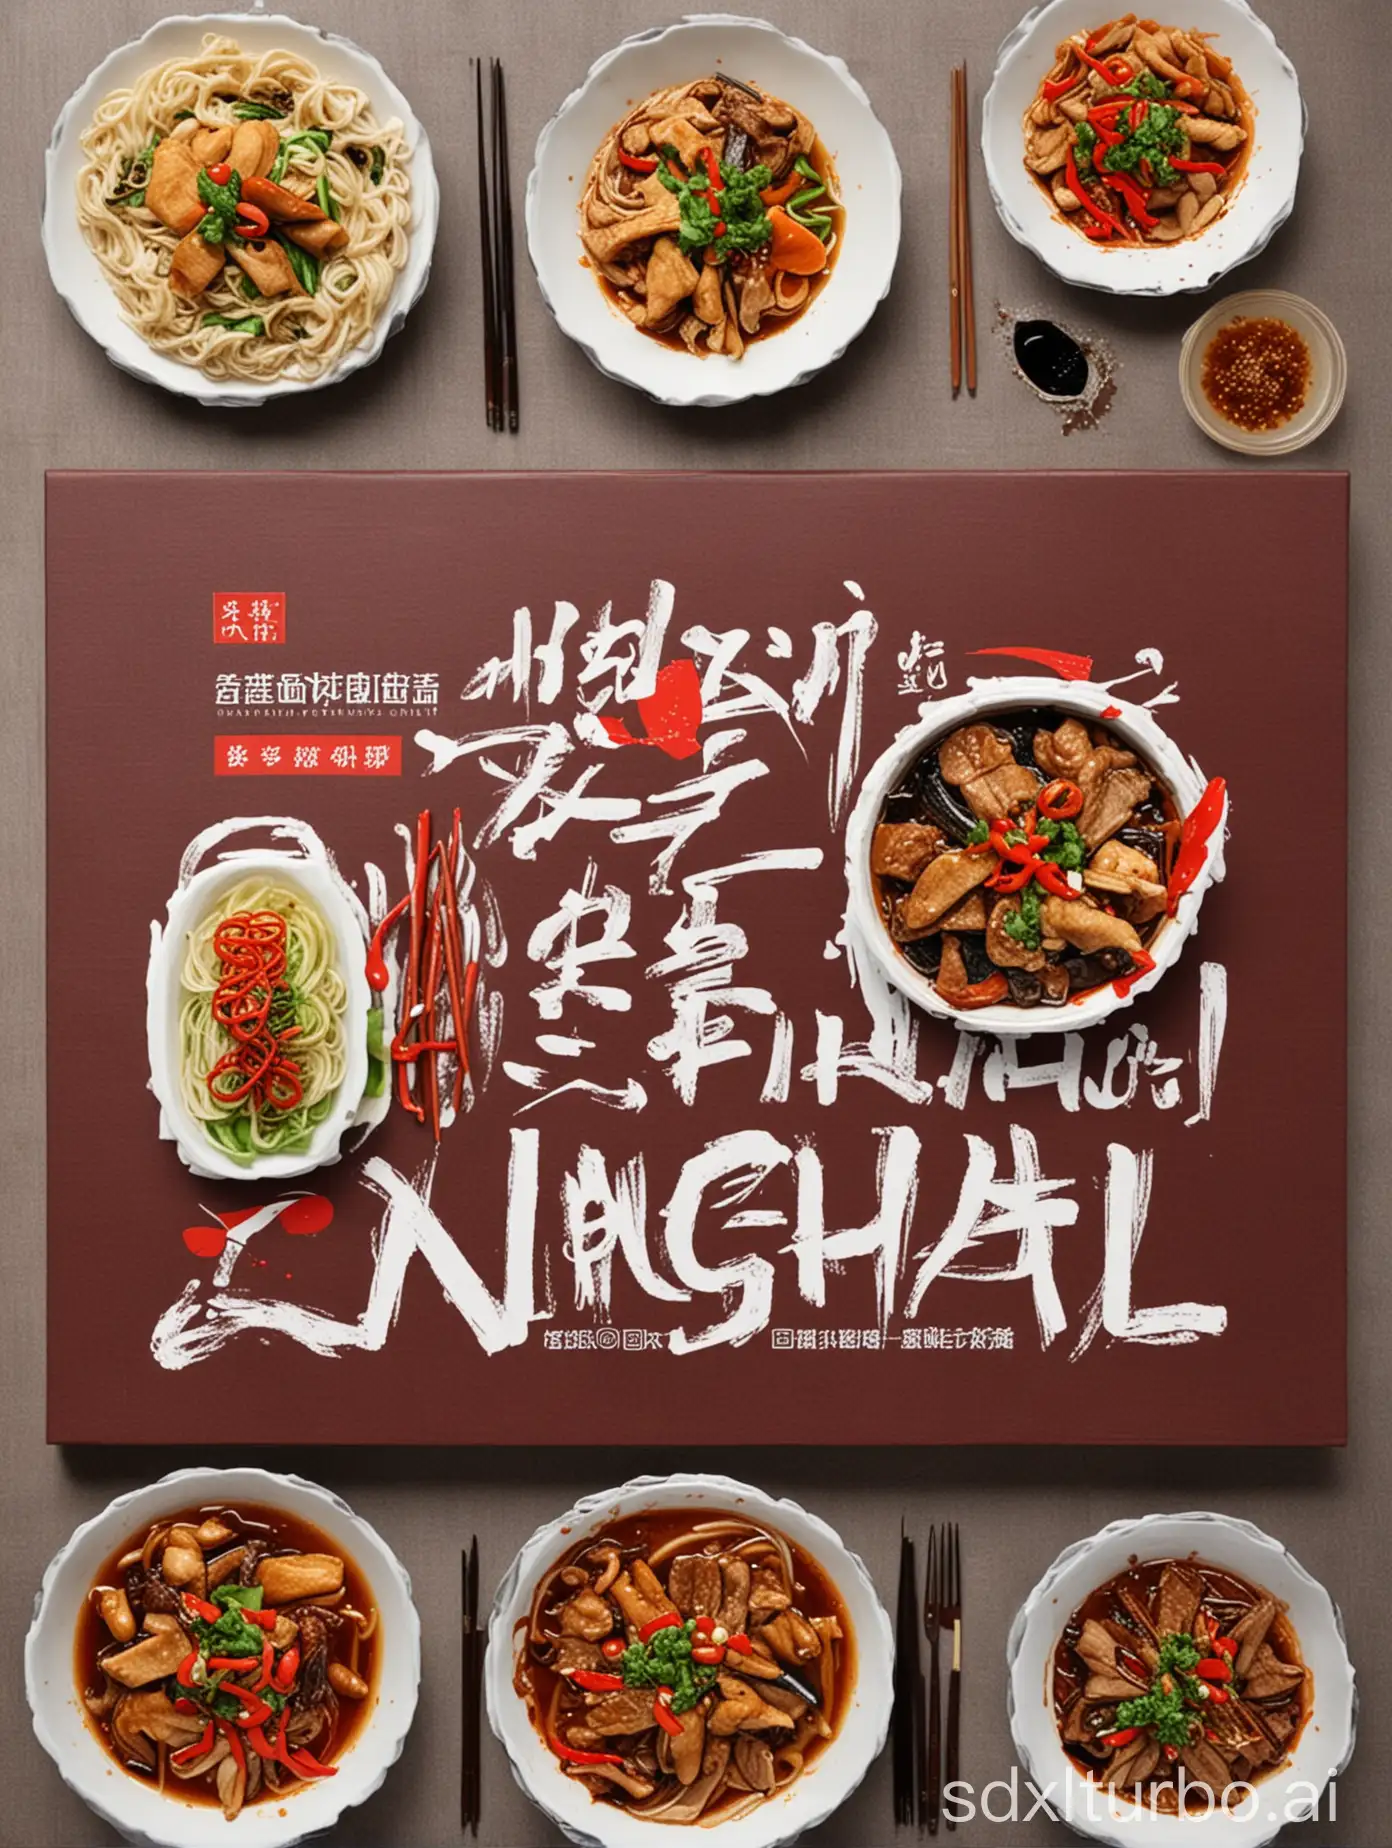 Draw an image of Ninghai cuisine from China as a video cover